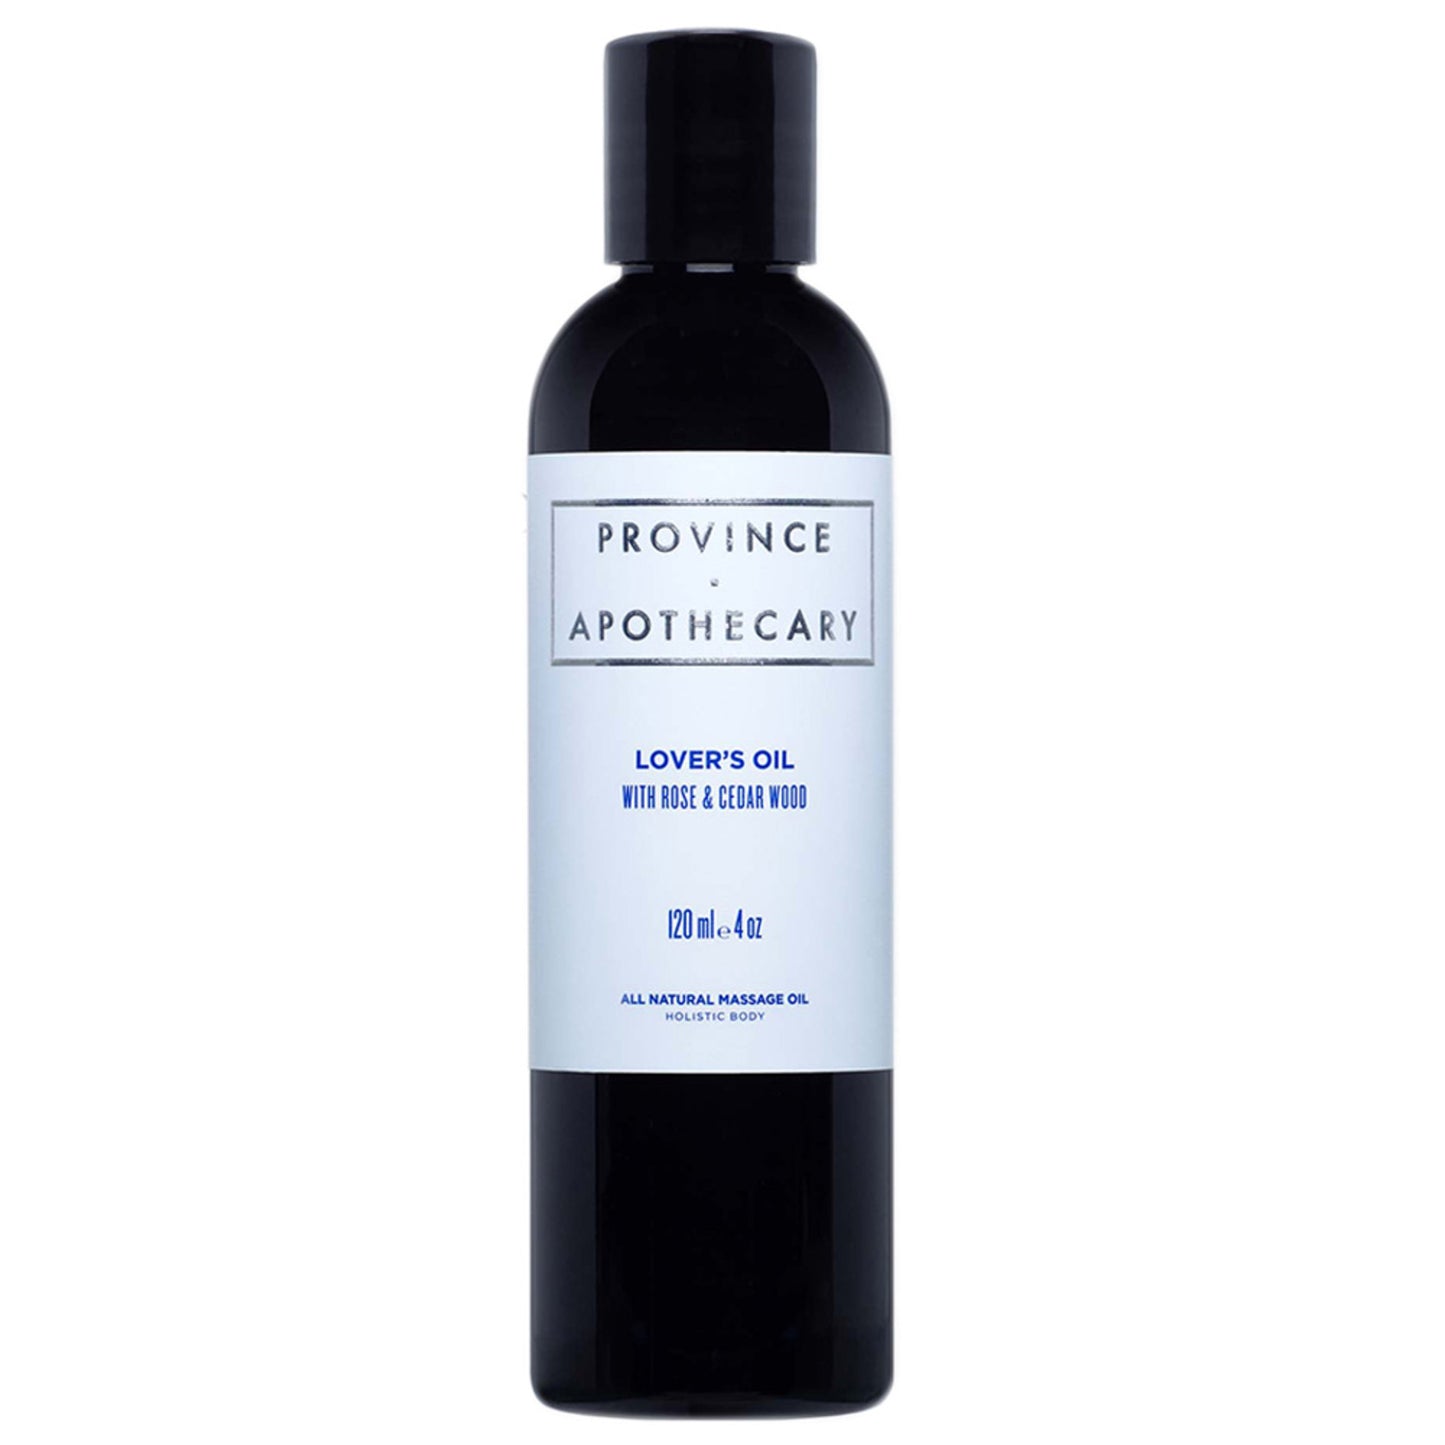 Province Apothecary Lover's Oil